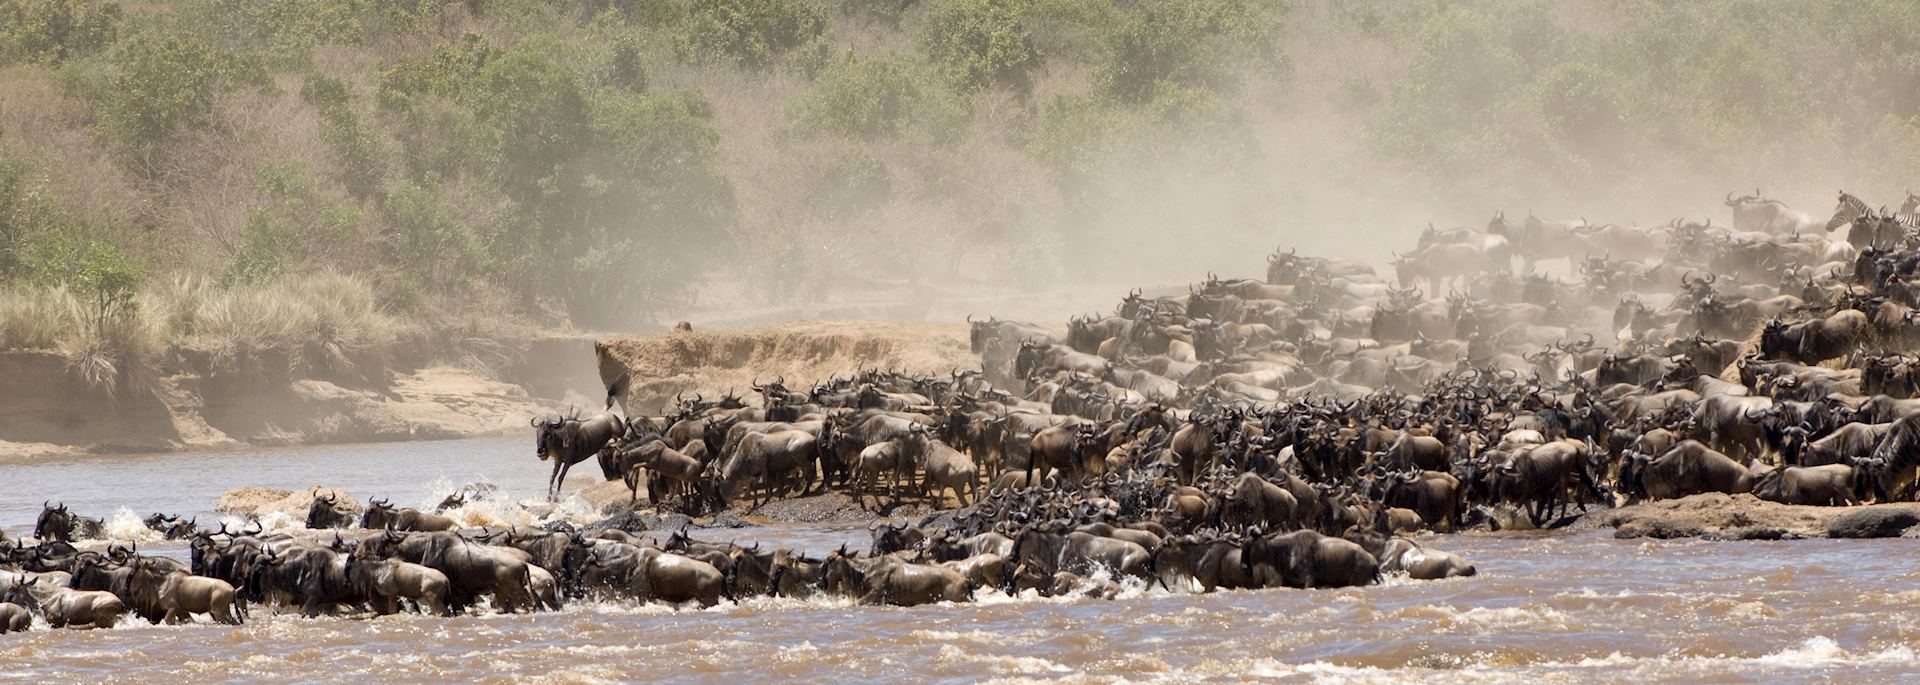 The Great Migration